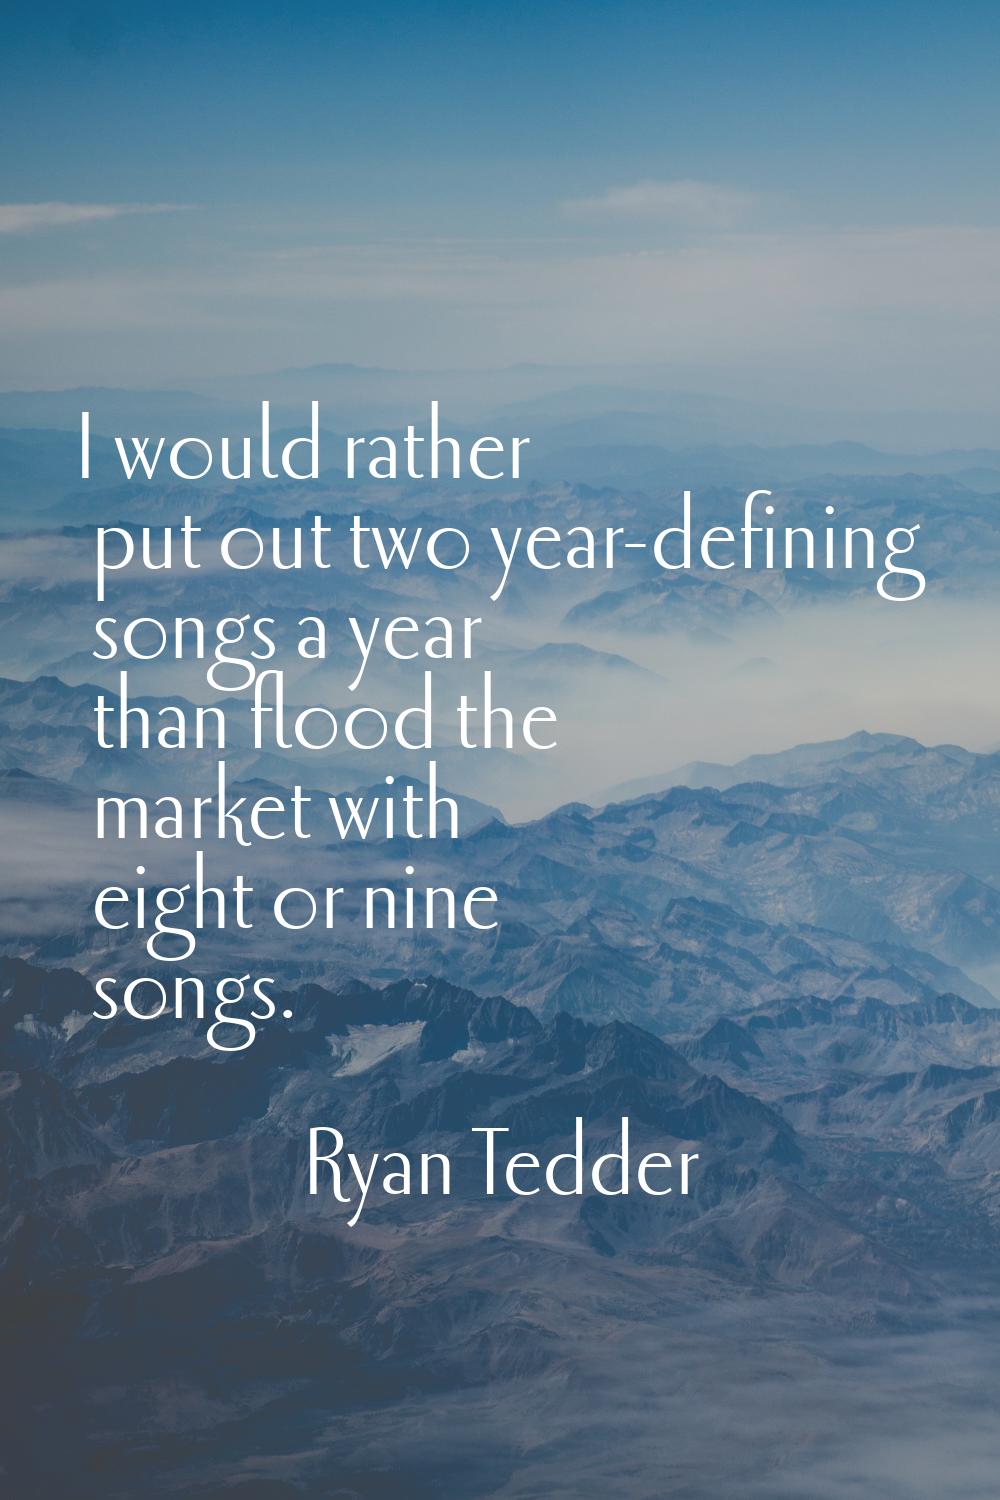 I would rather put out two year-defining songs a year than flood the market with eight or nine song